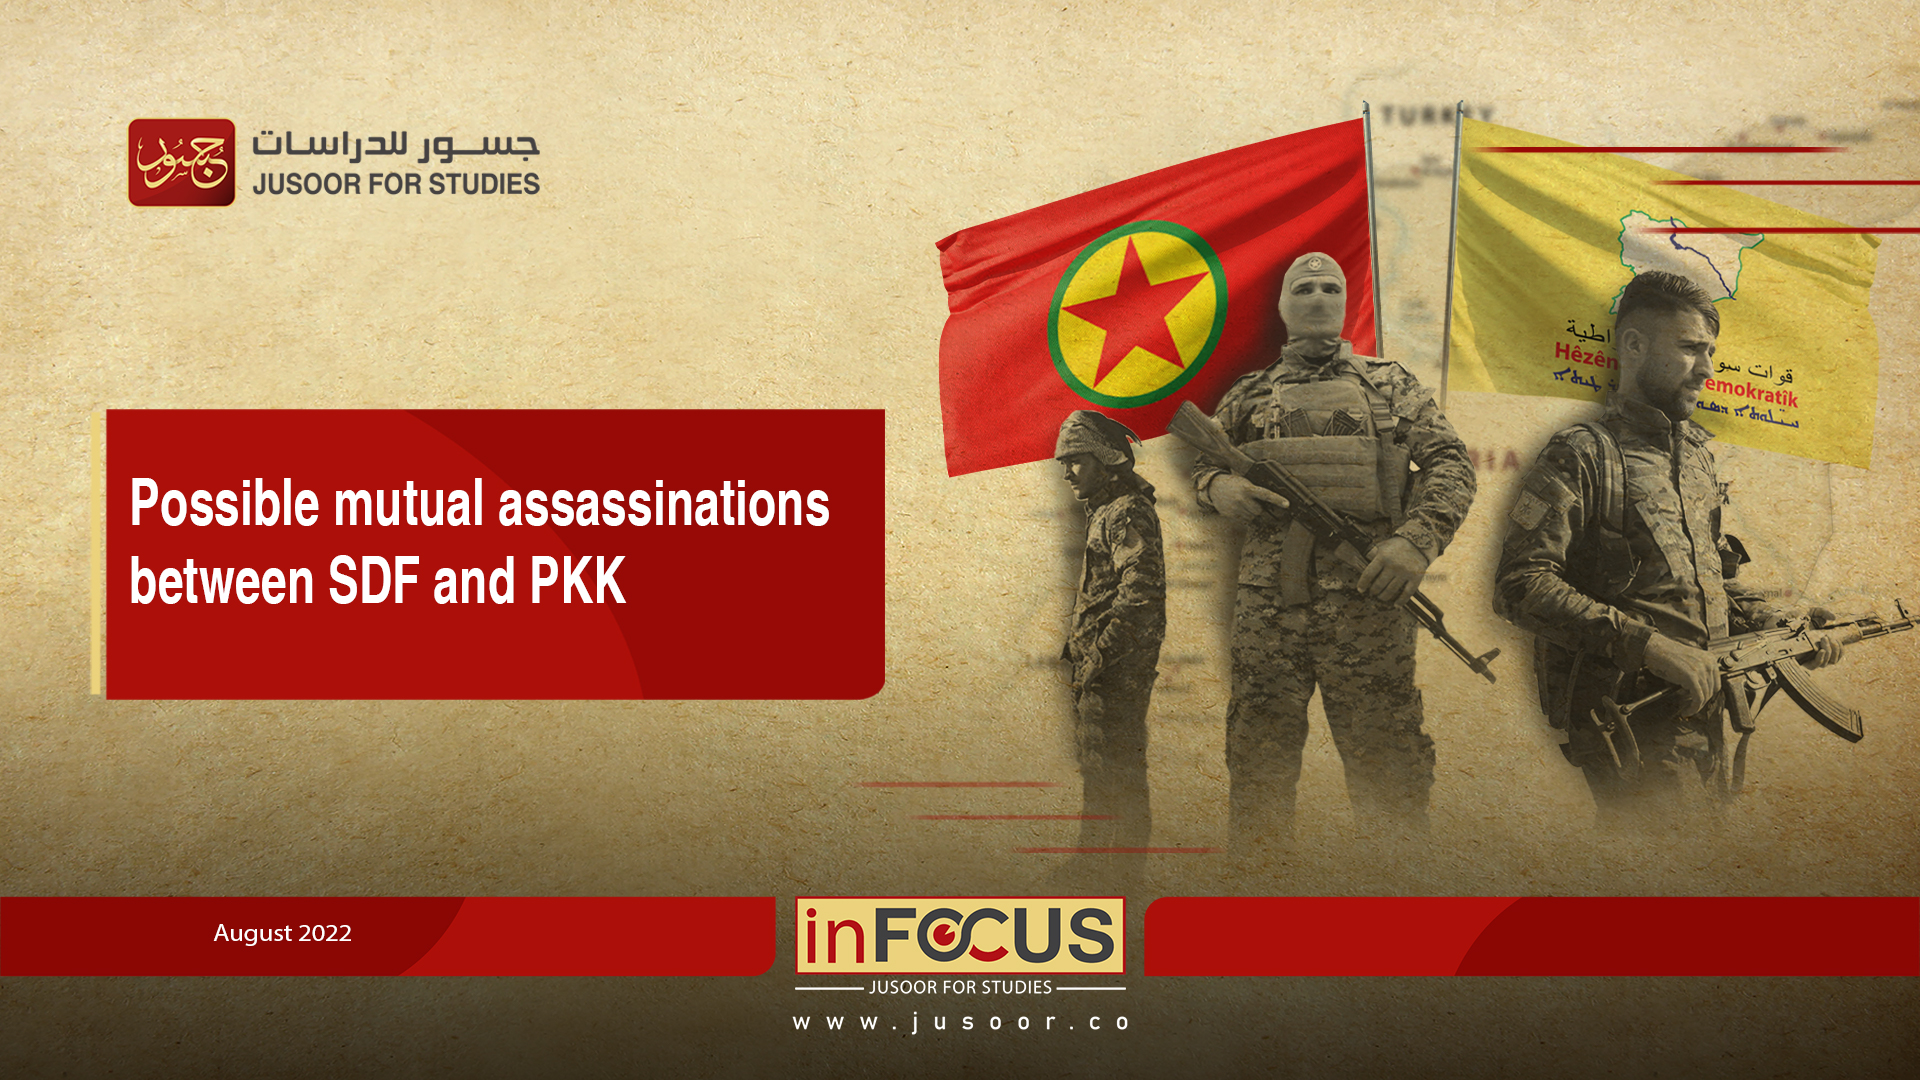 Possible mutual assassinations between SDF and PKK